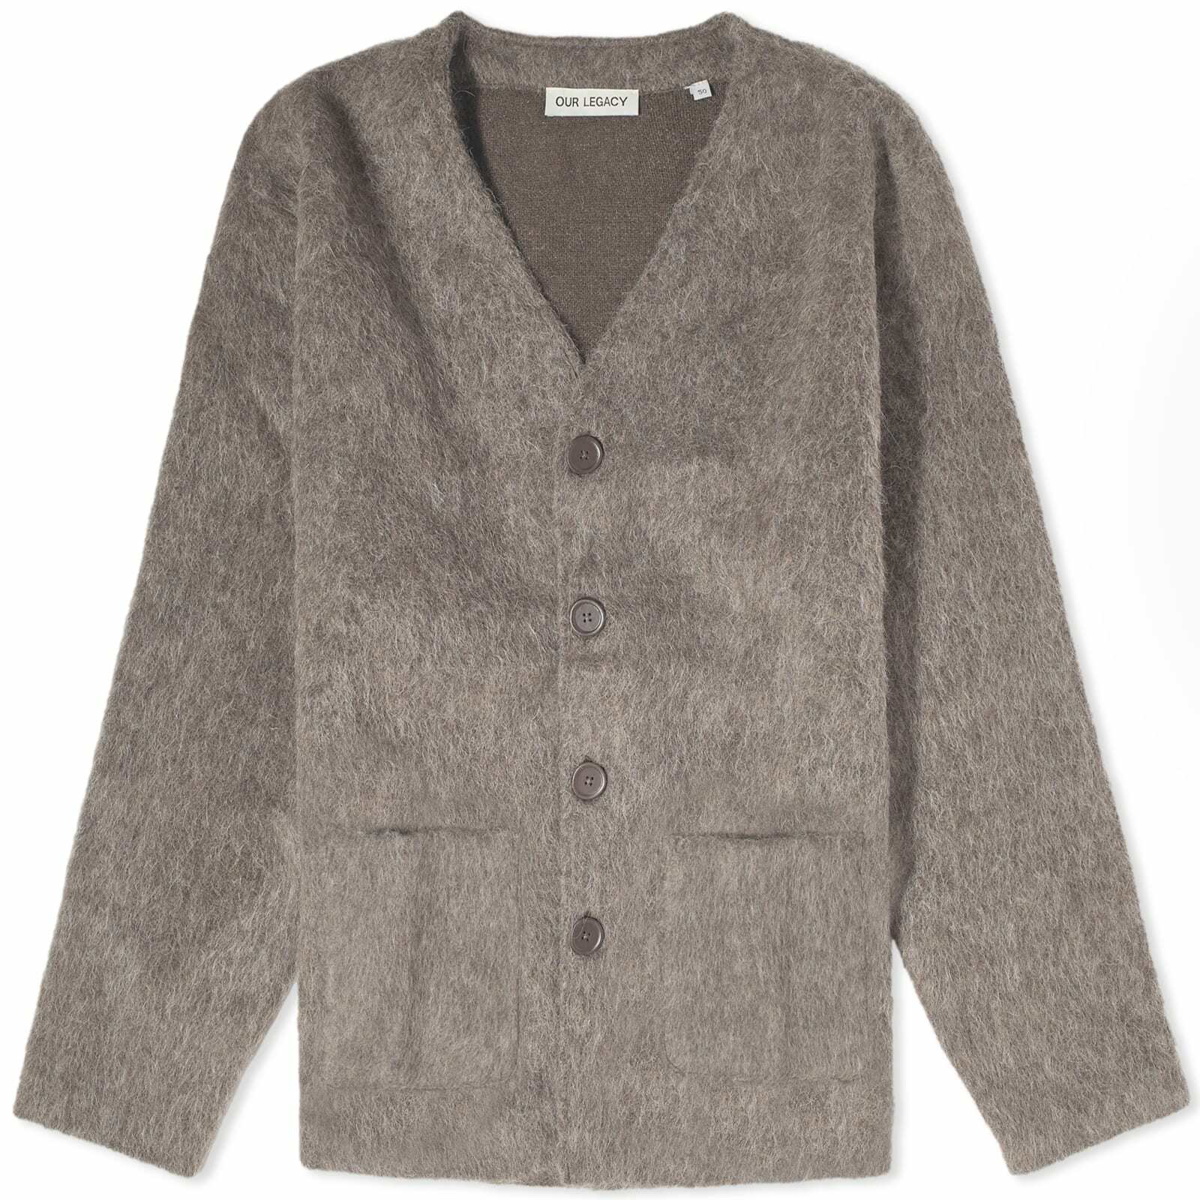 Our Legacy Men's Cardigan in Mole Grey Mohair Our Legacy